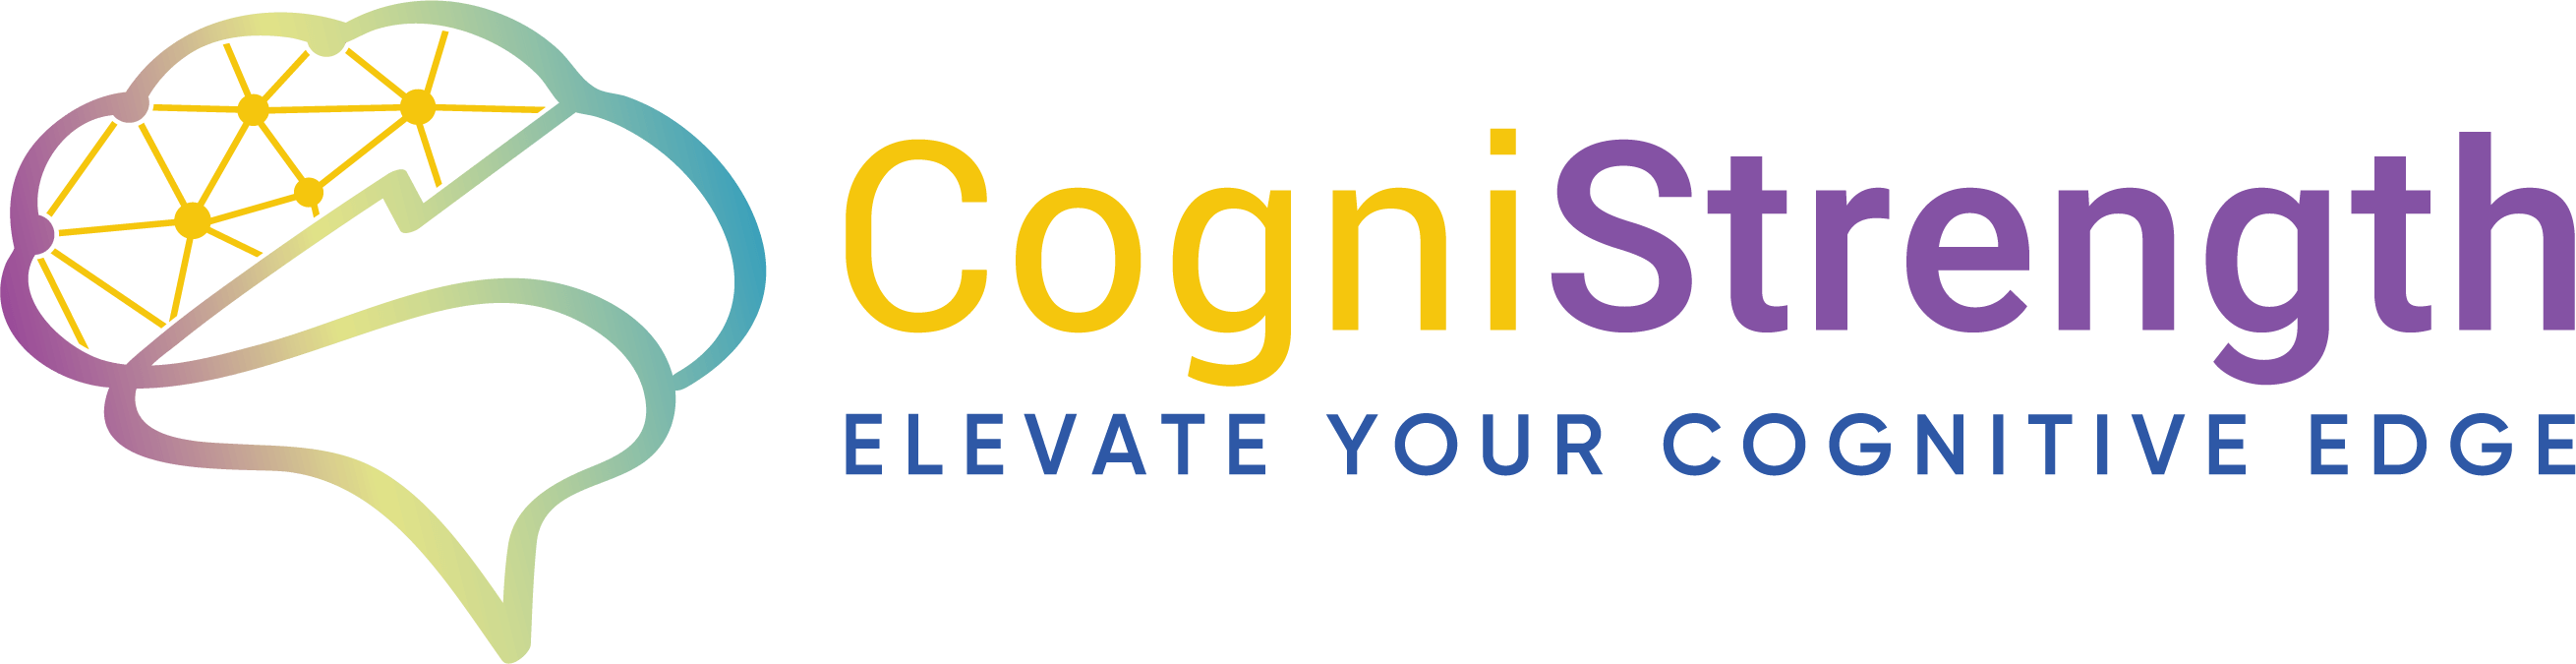 CogniStrength